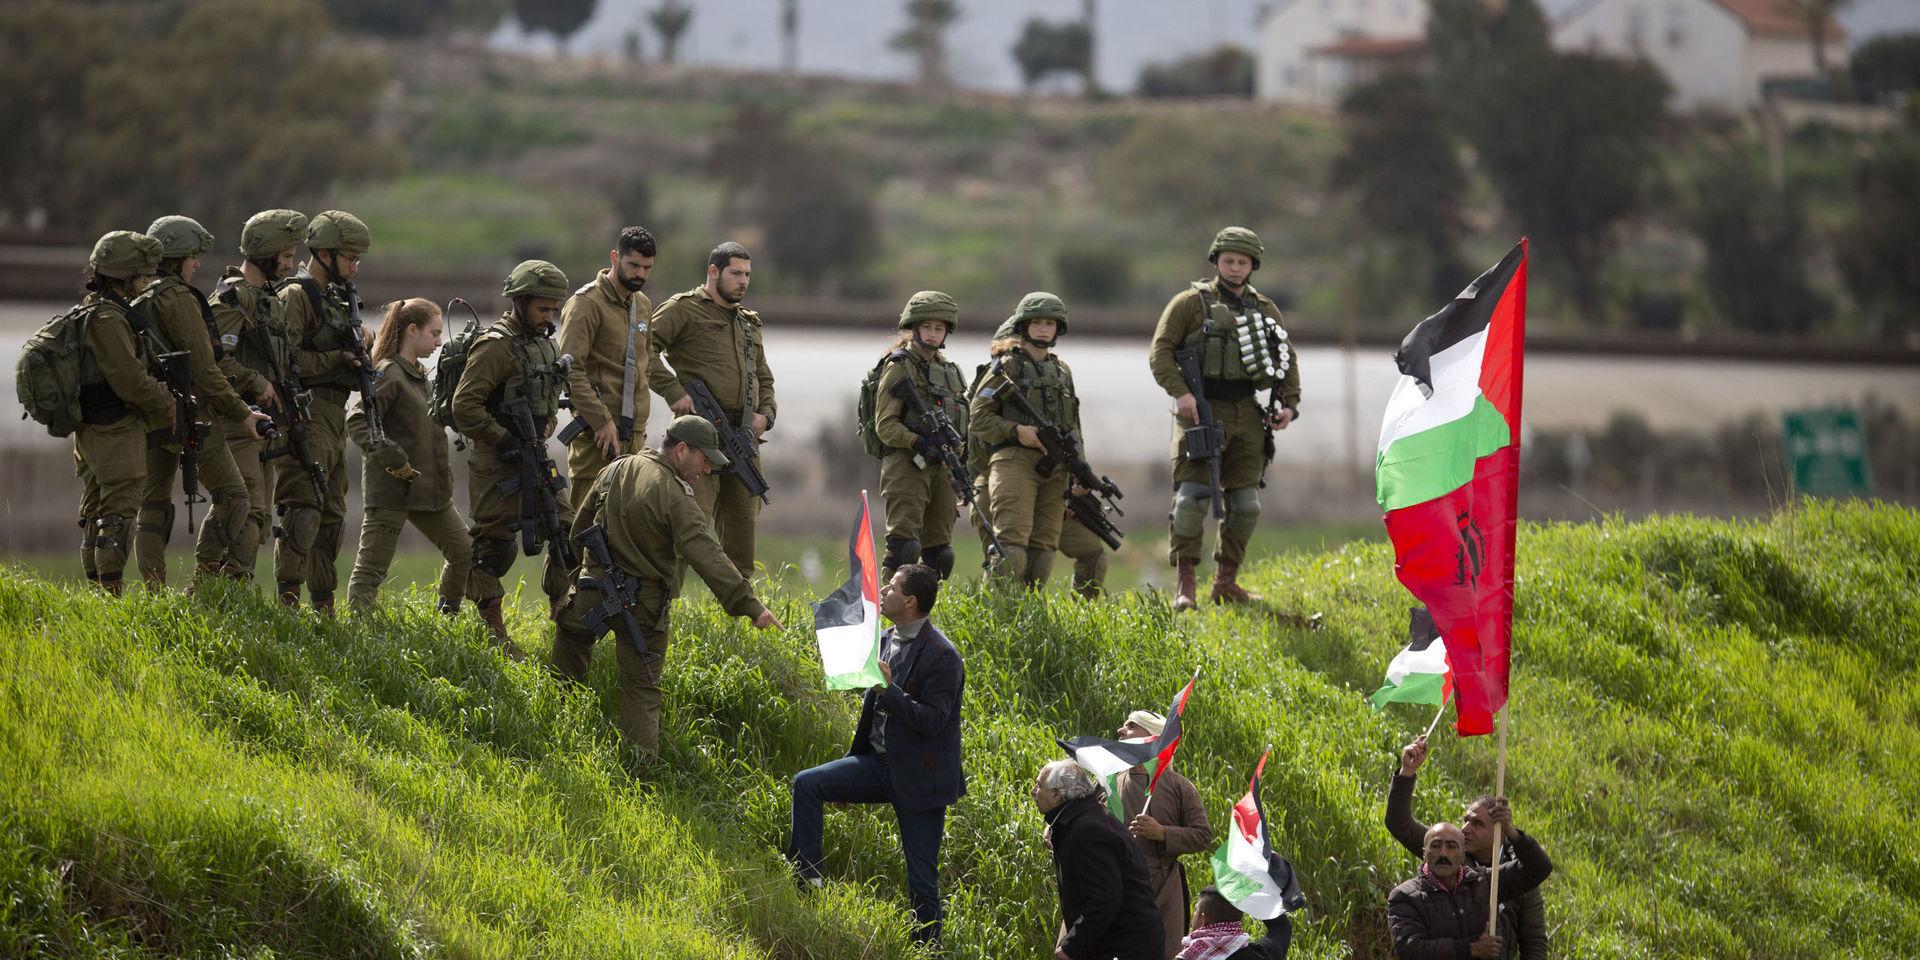 Palestinian demonstrators hold a national flag in front of Israeli forces as they protest against U.S. President Donald Trump&apos;s Mideast initiative, near a Jewish settlement Beqa&apos;ot in Jordan Valley in the West Bank, Saturday, Feb. 29, 2020. (AP Photo/Majdi Mohammed).  MJ106